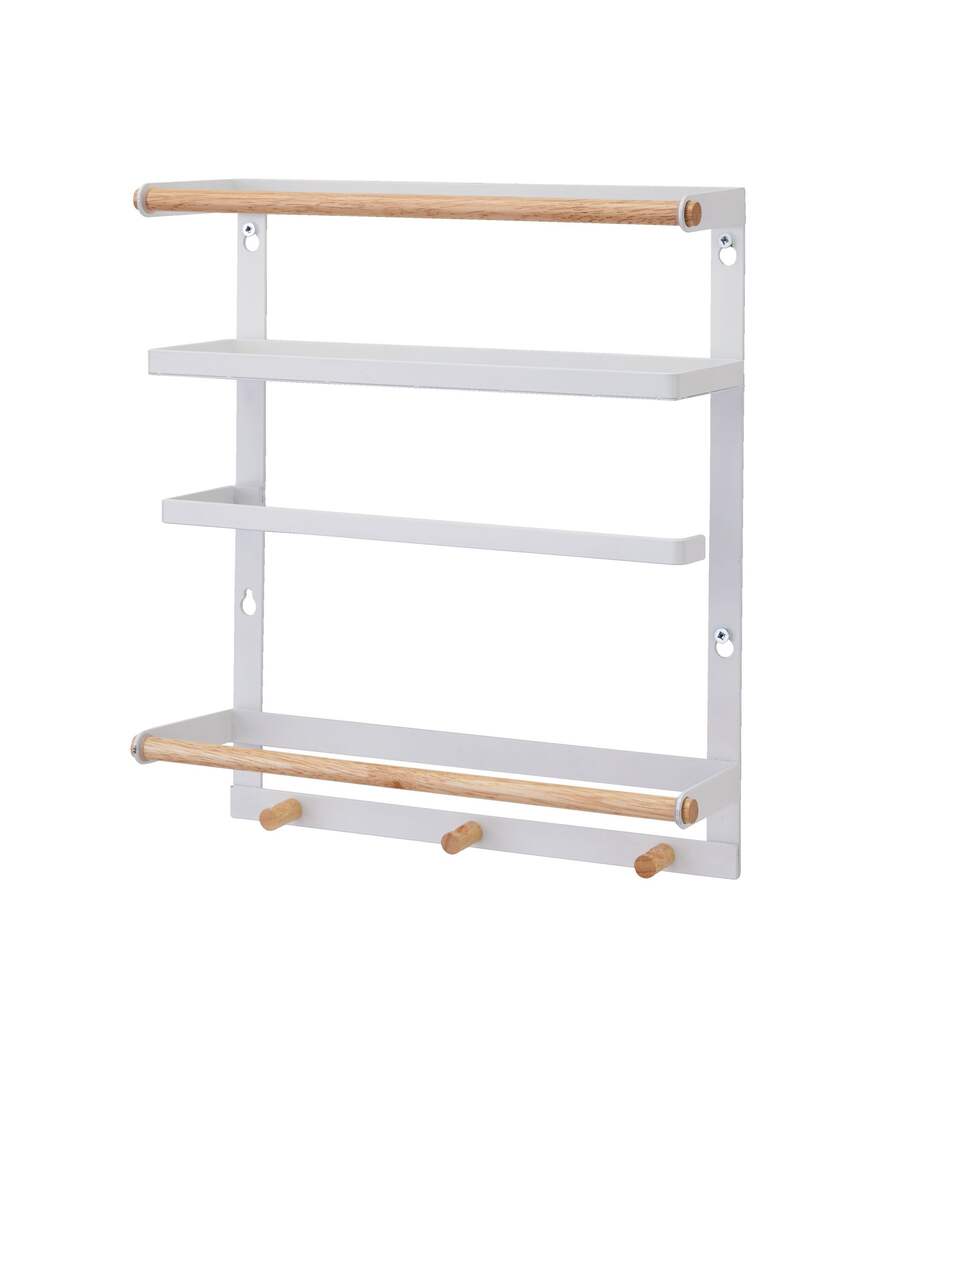 Type A Linear Metal Wall Organizer with Shelf, Paper Towel Holder & Hooks,  White